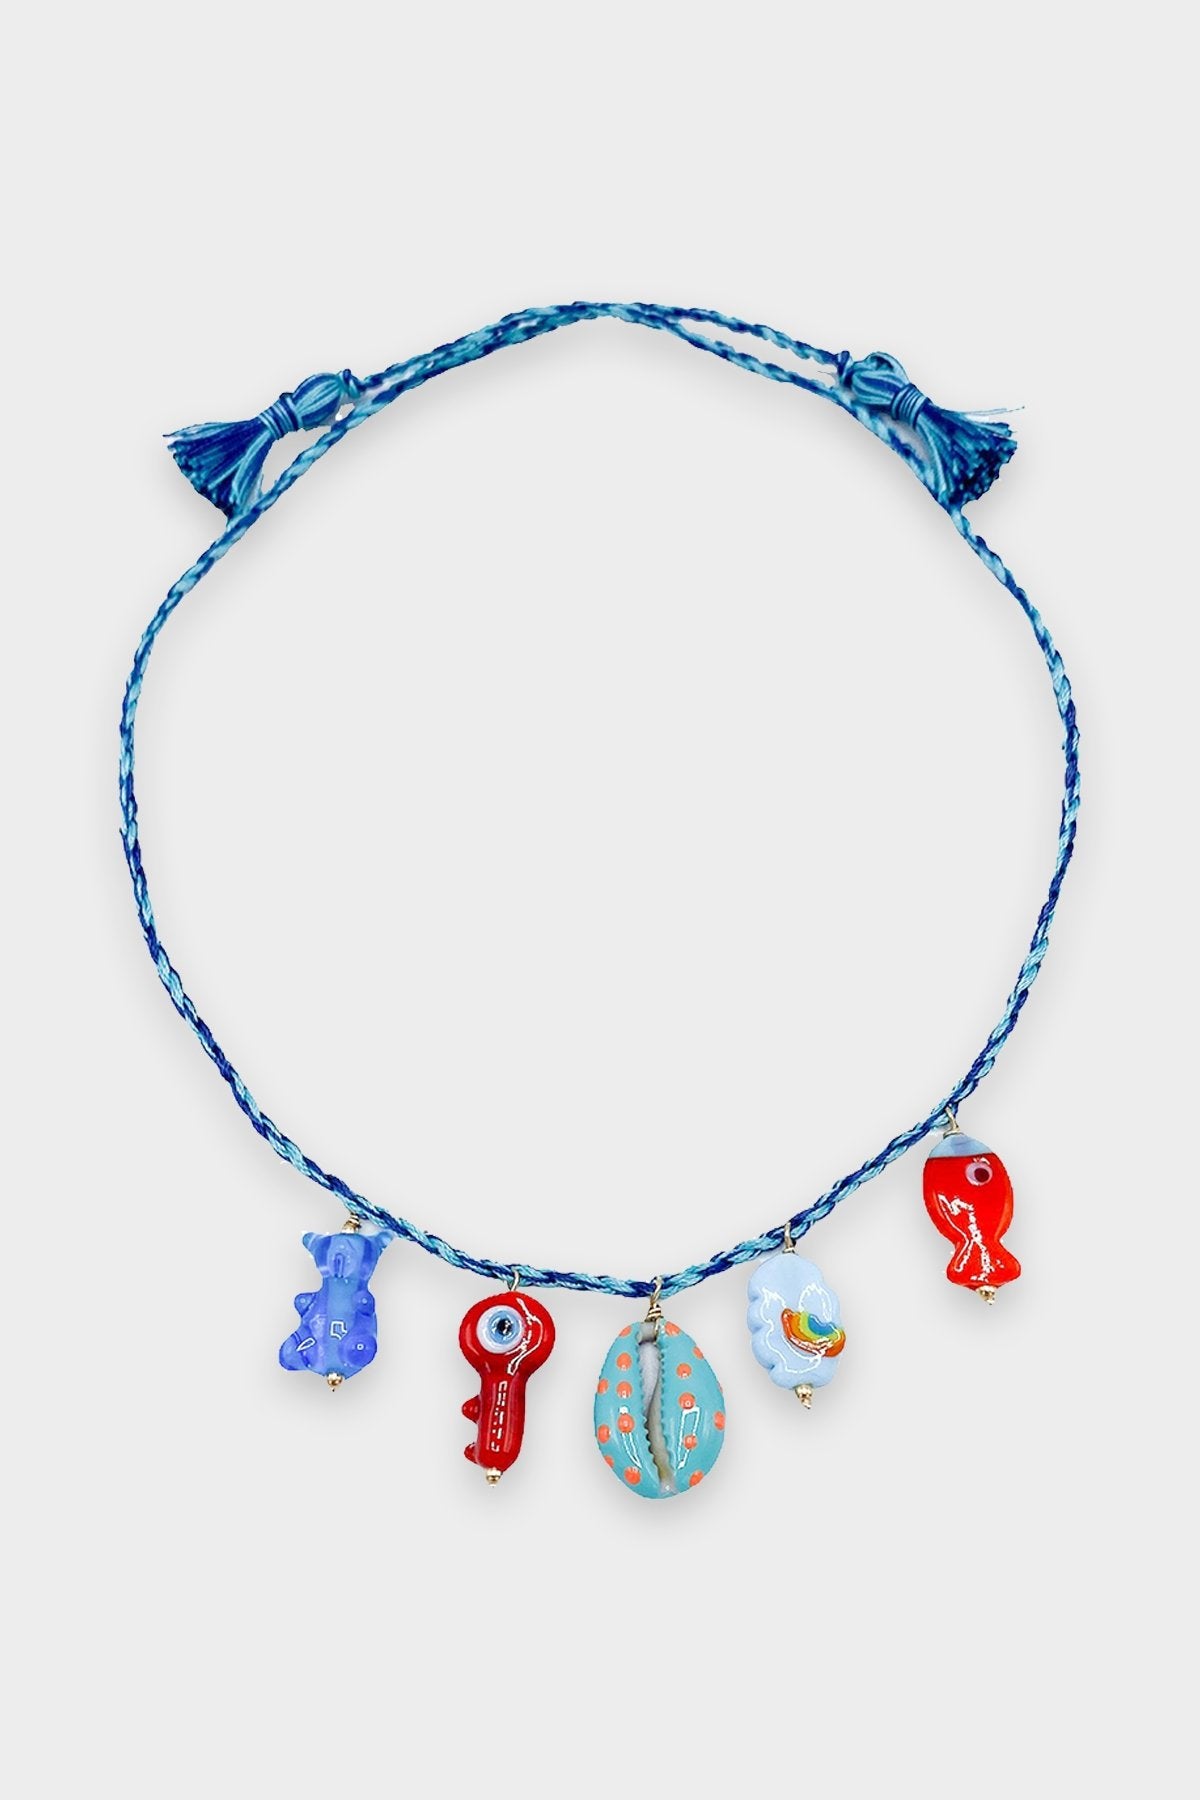 Nosy Be Cord Necklace in Blue Cord with Pearl Smiley - shop-olivia.com